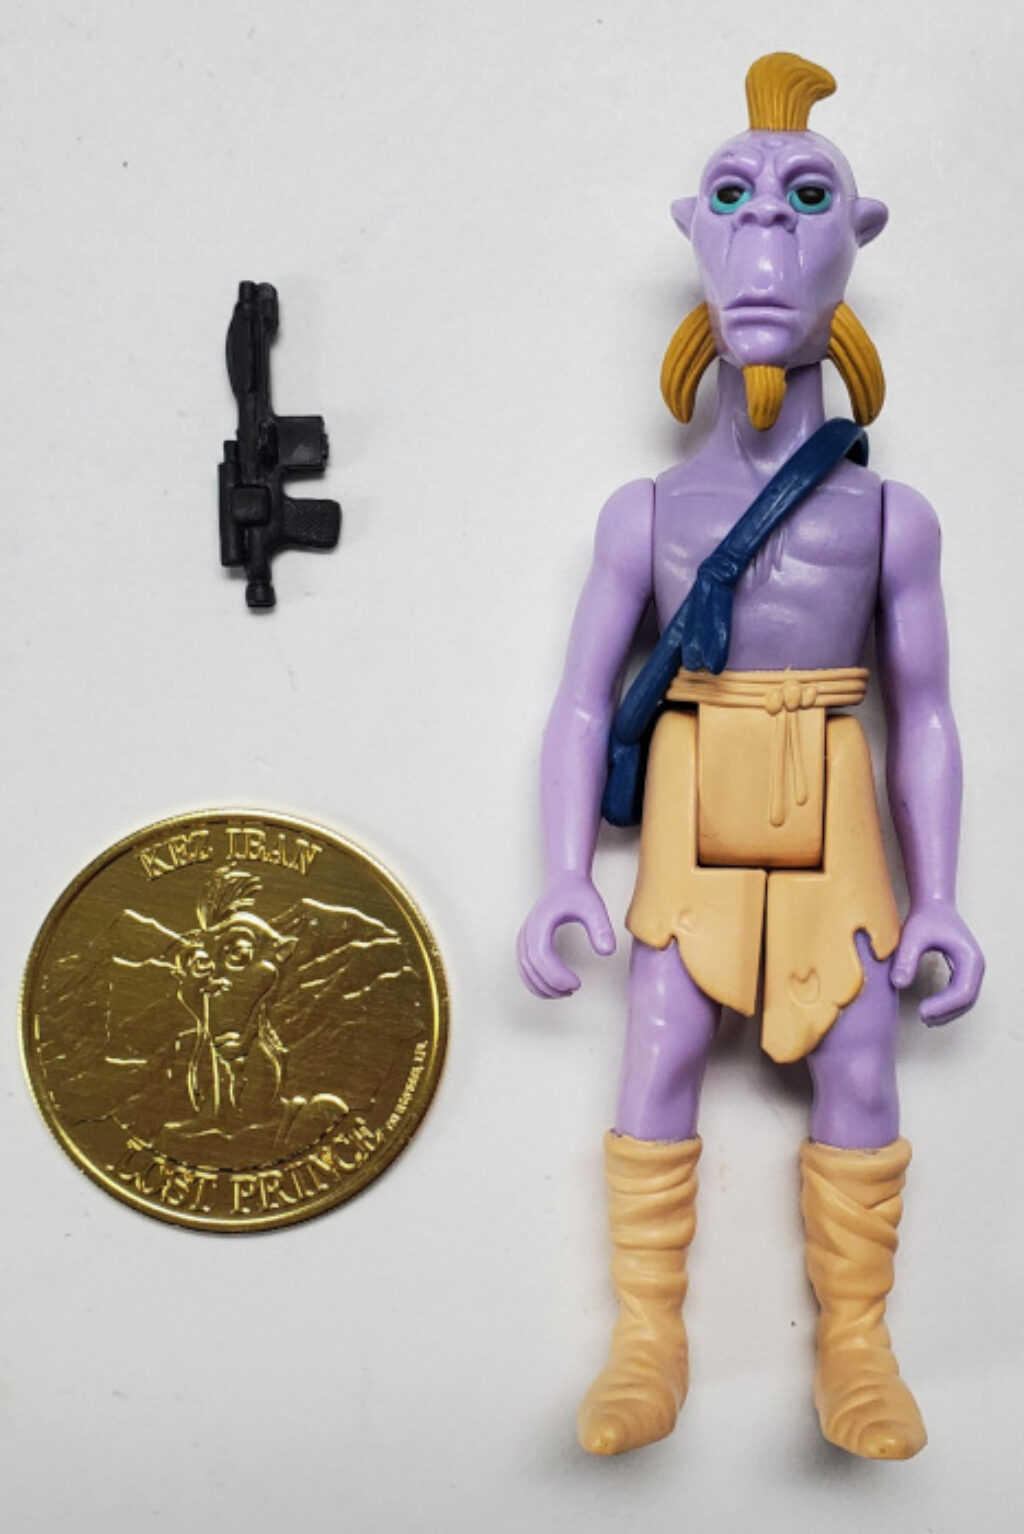 NM 1985 Kenner Star Wars Droids Kez Iban with Coin, Pistol and Satchel 1